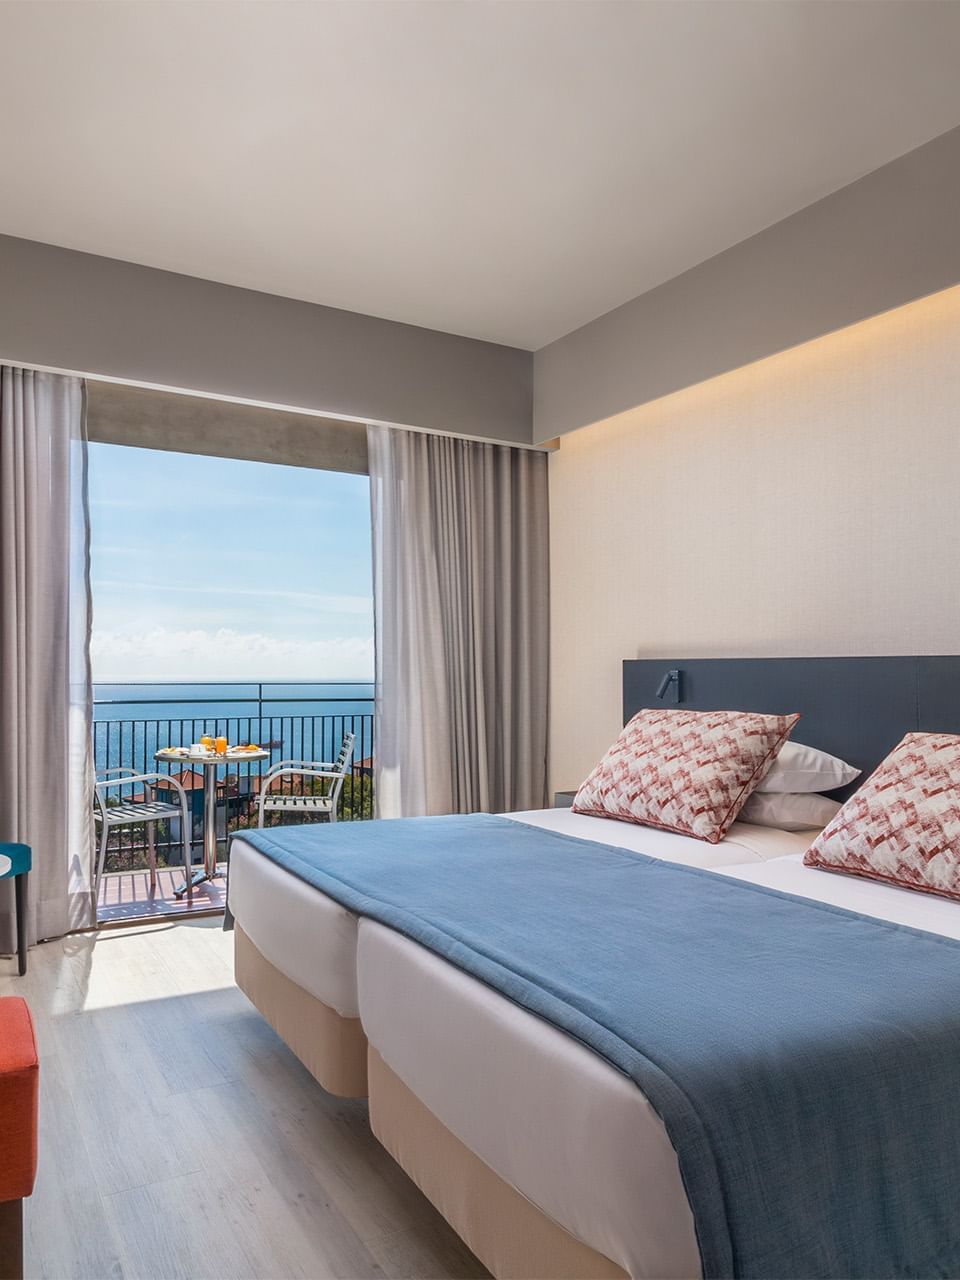 Sea View Room at Enotel Magnólia in Funchal